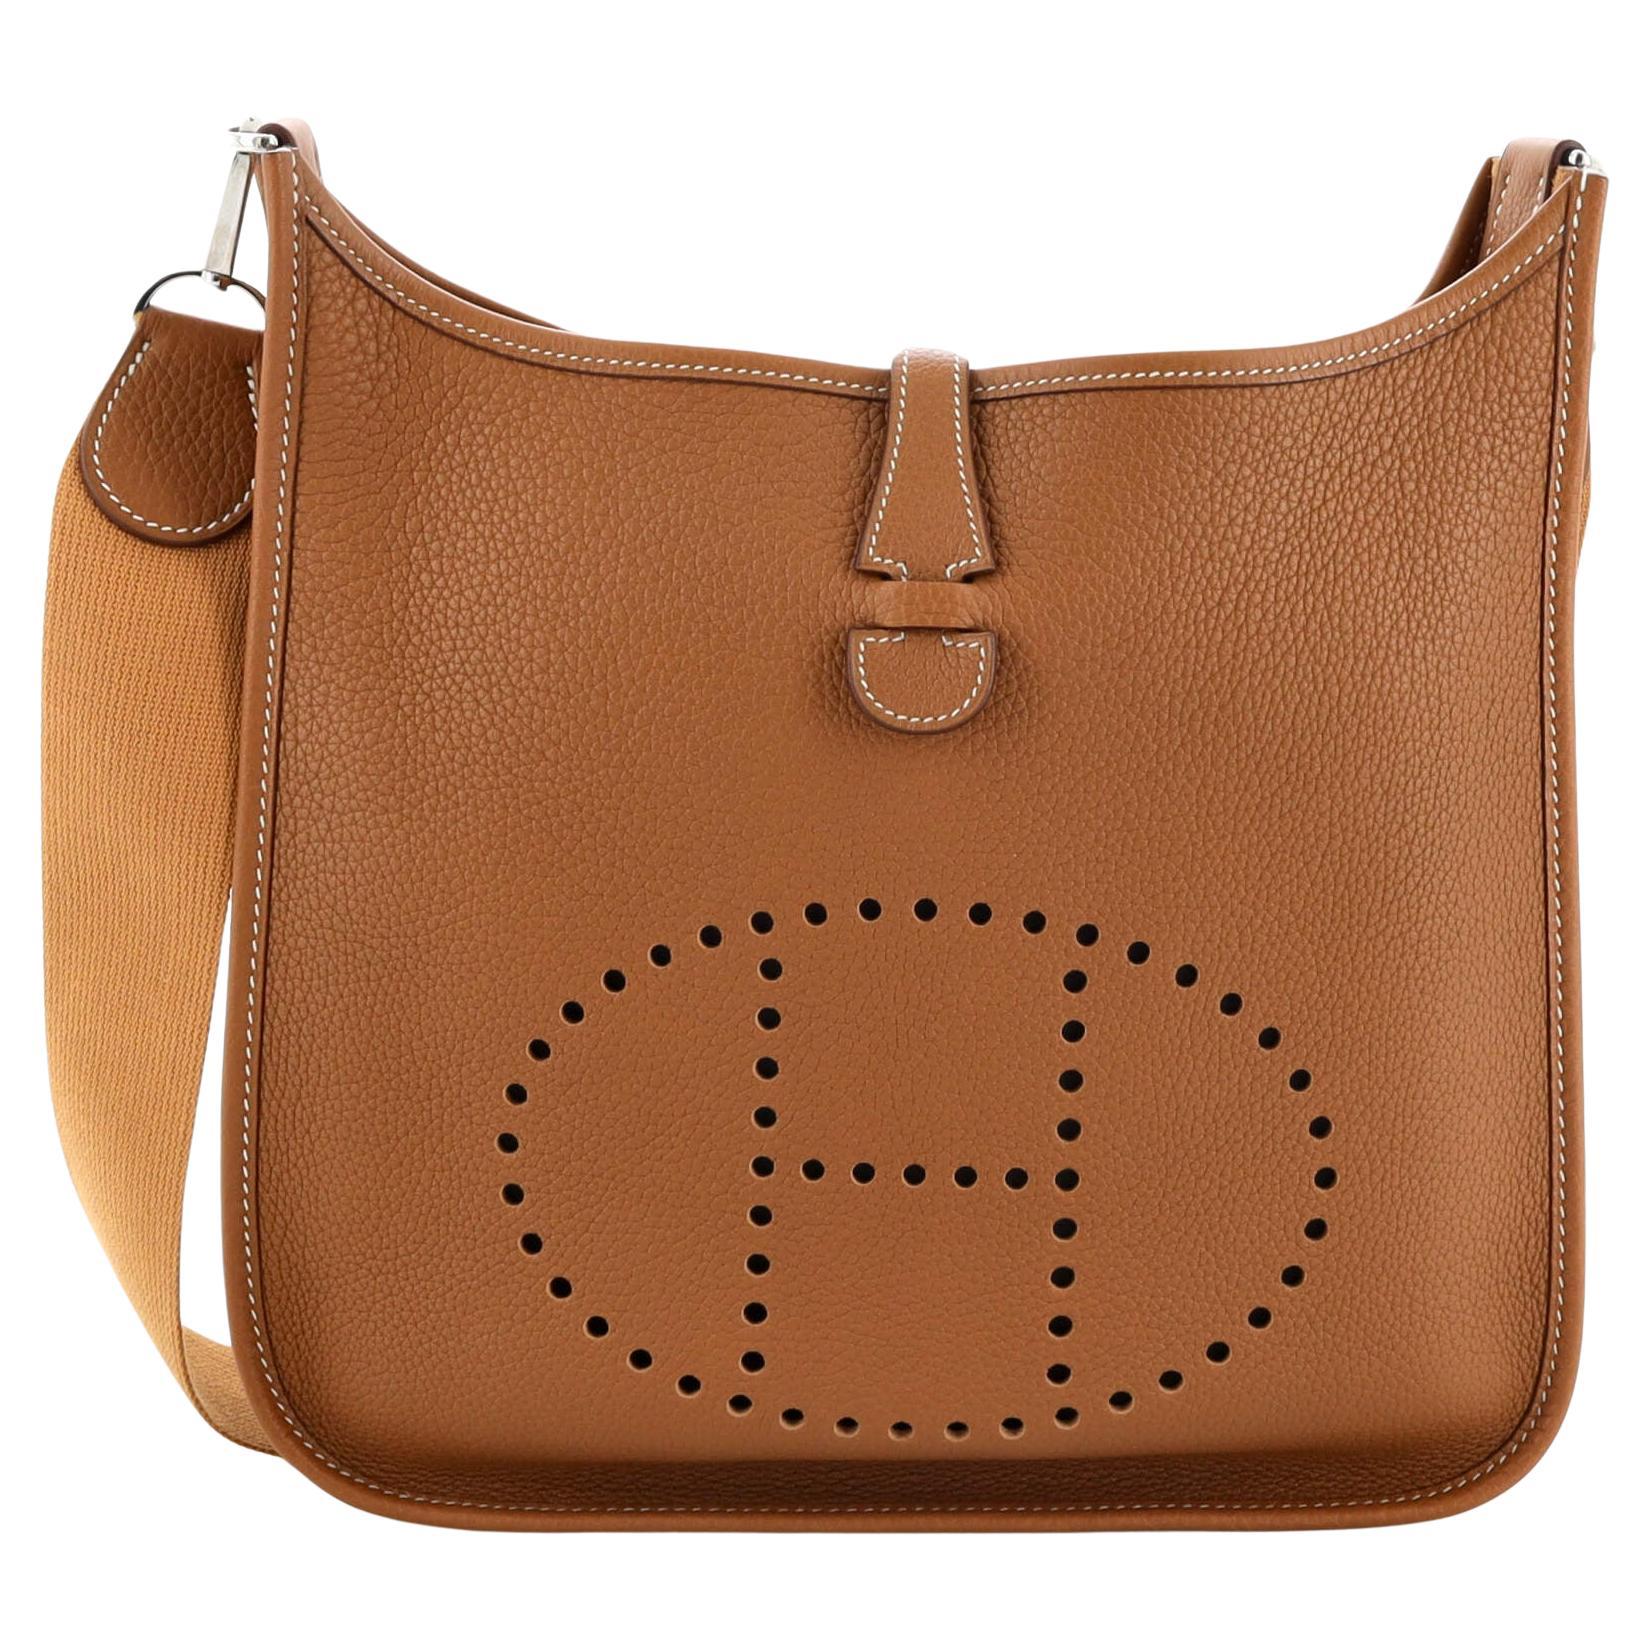 Rare Hermes Vintage Caramel Brown Clemence Leather Crossbody Small